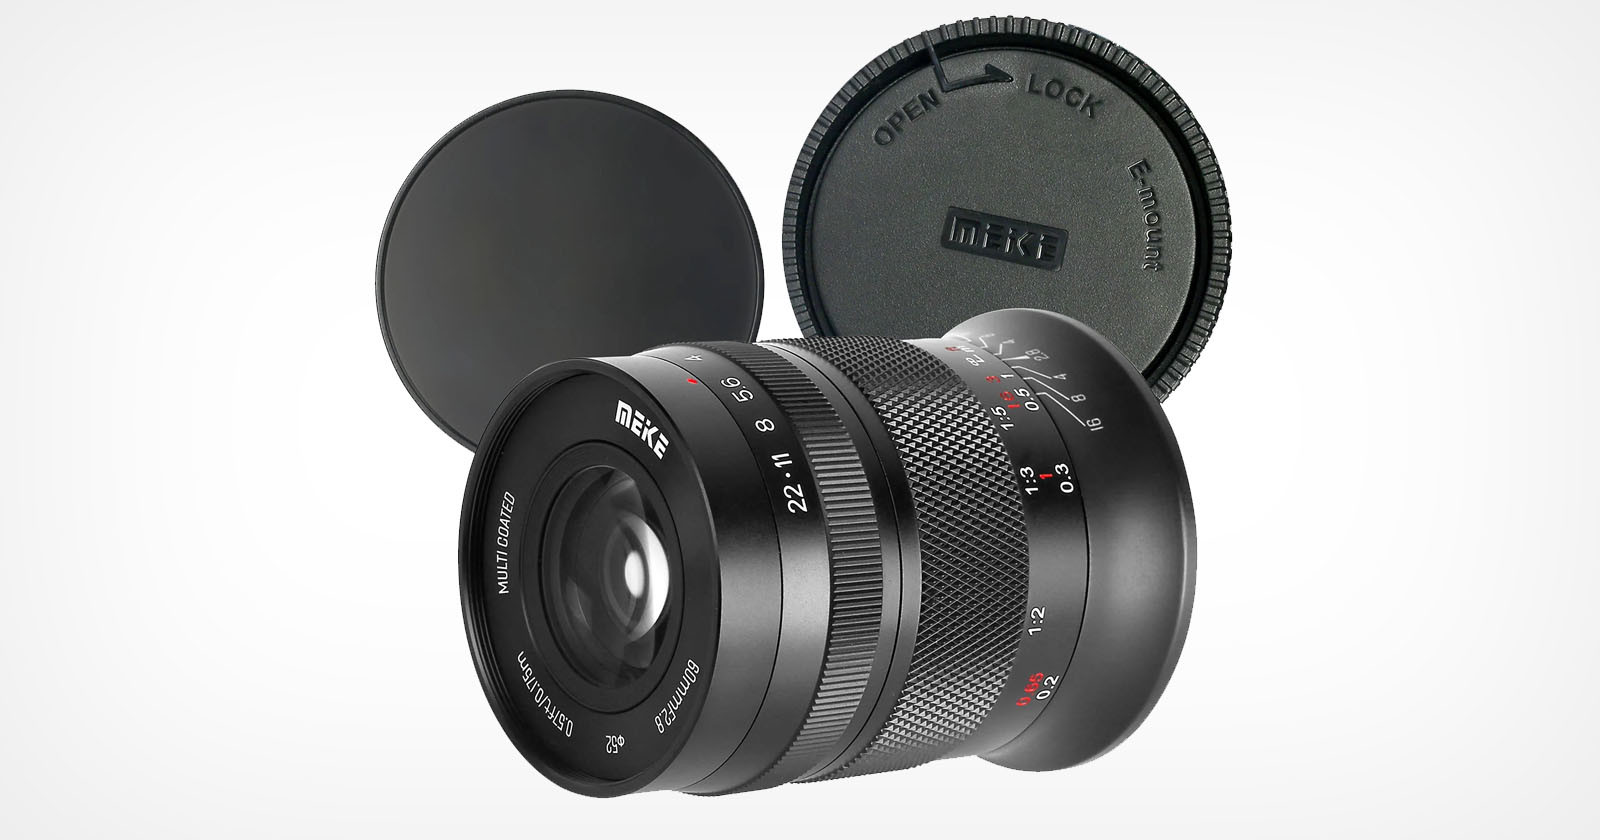 Meikes New 60mm f/2.8 Macro Lens for APS-C Cameras Costs Just $190